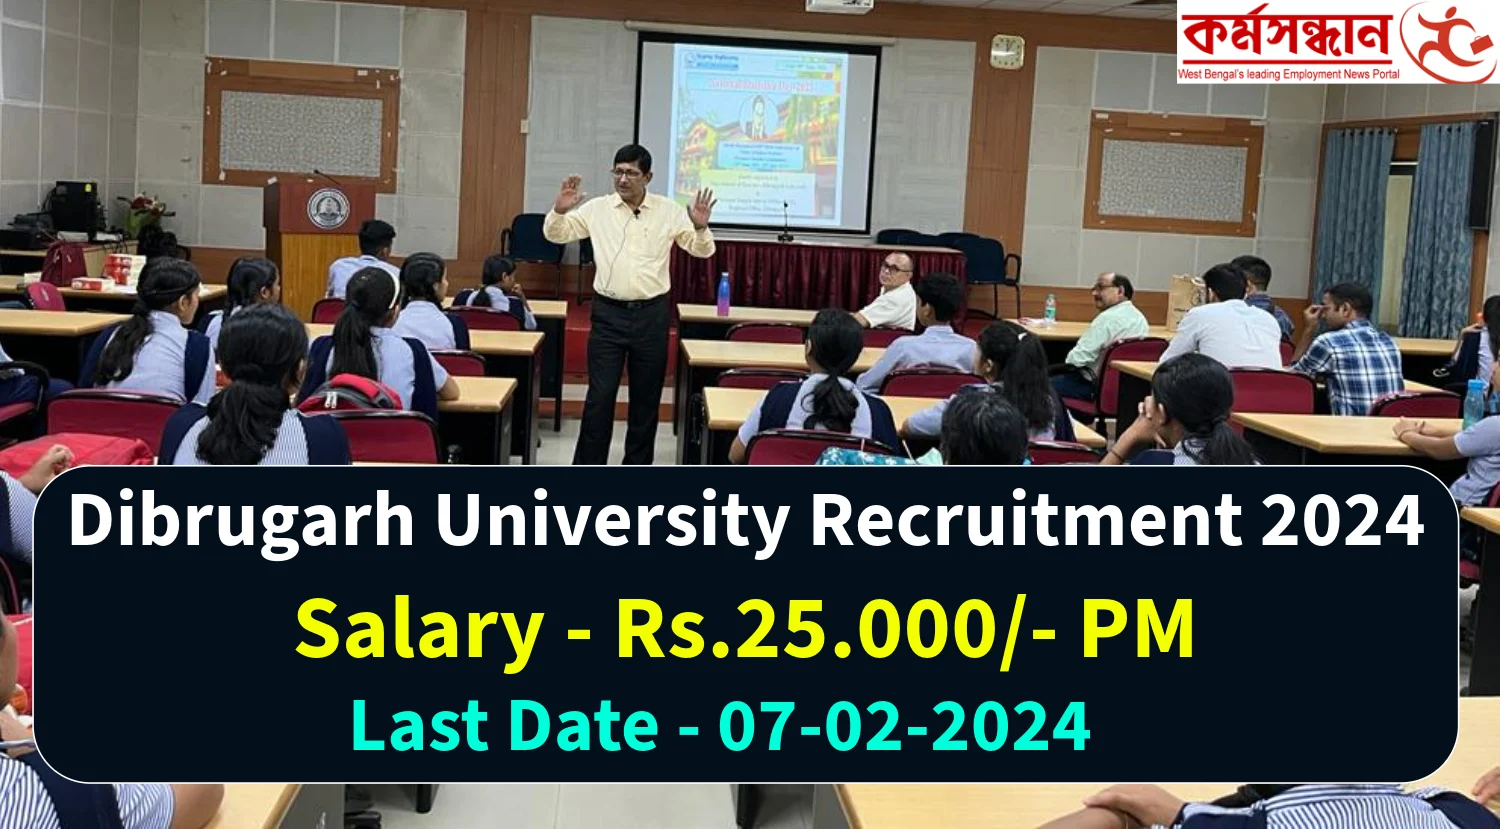 Dibrugarh University Recruitment 2024 for Various Faculty Posts, Apply Now